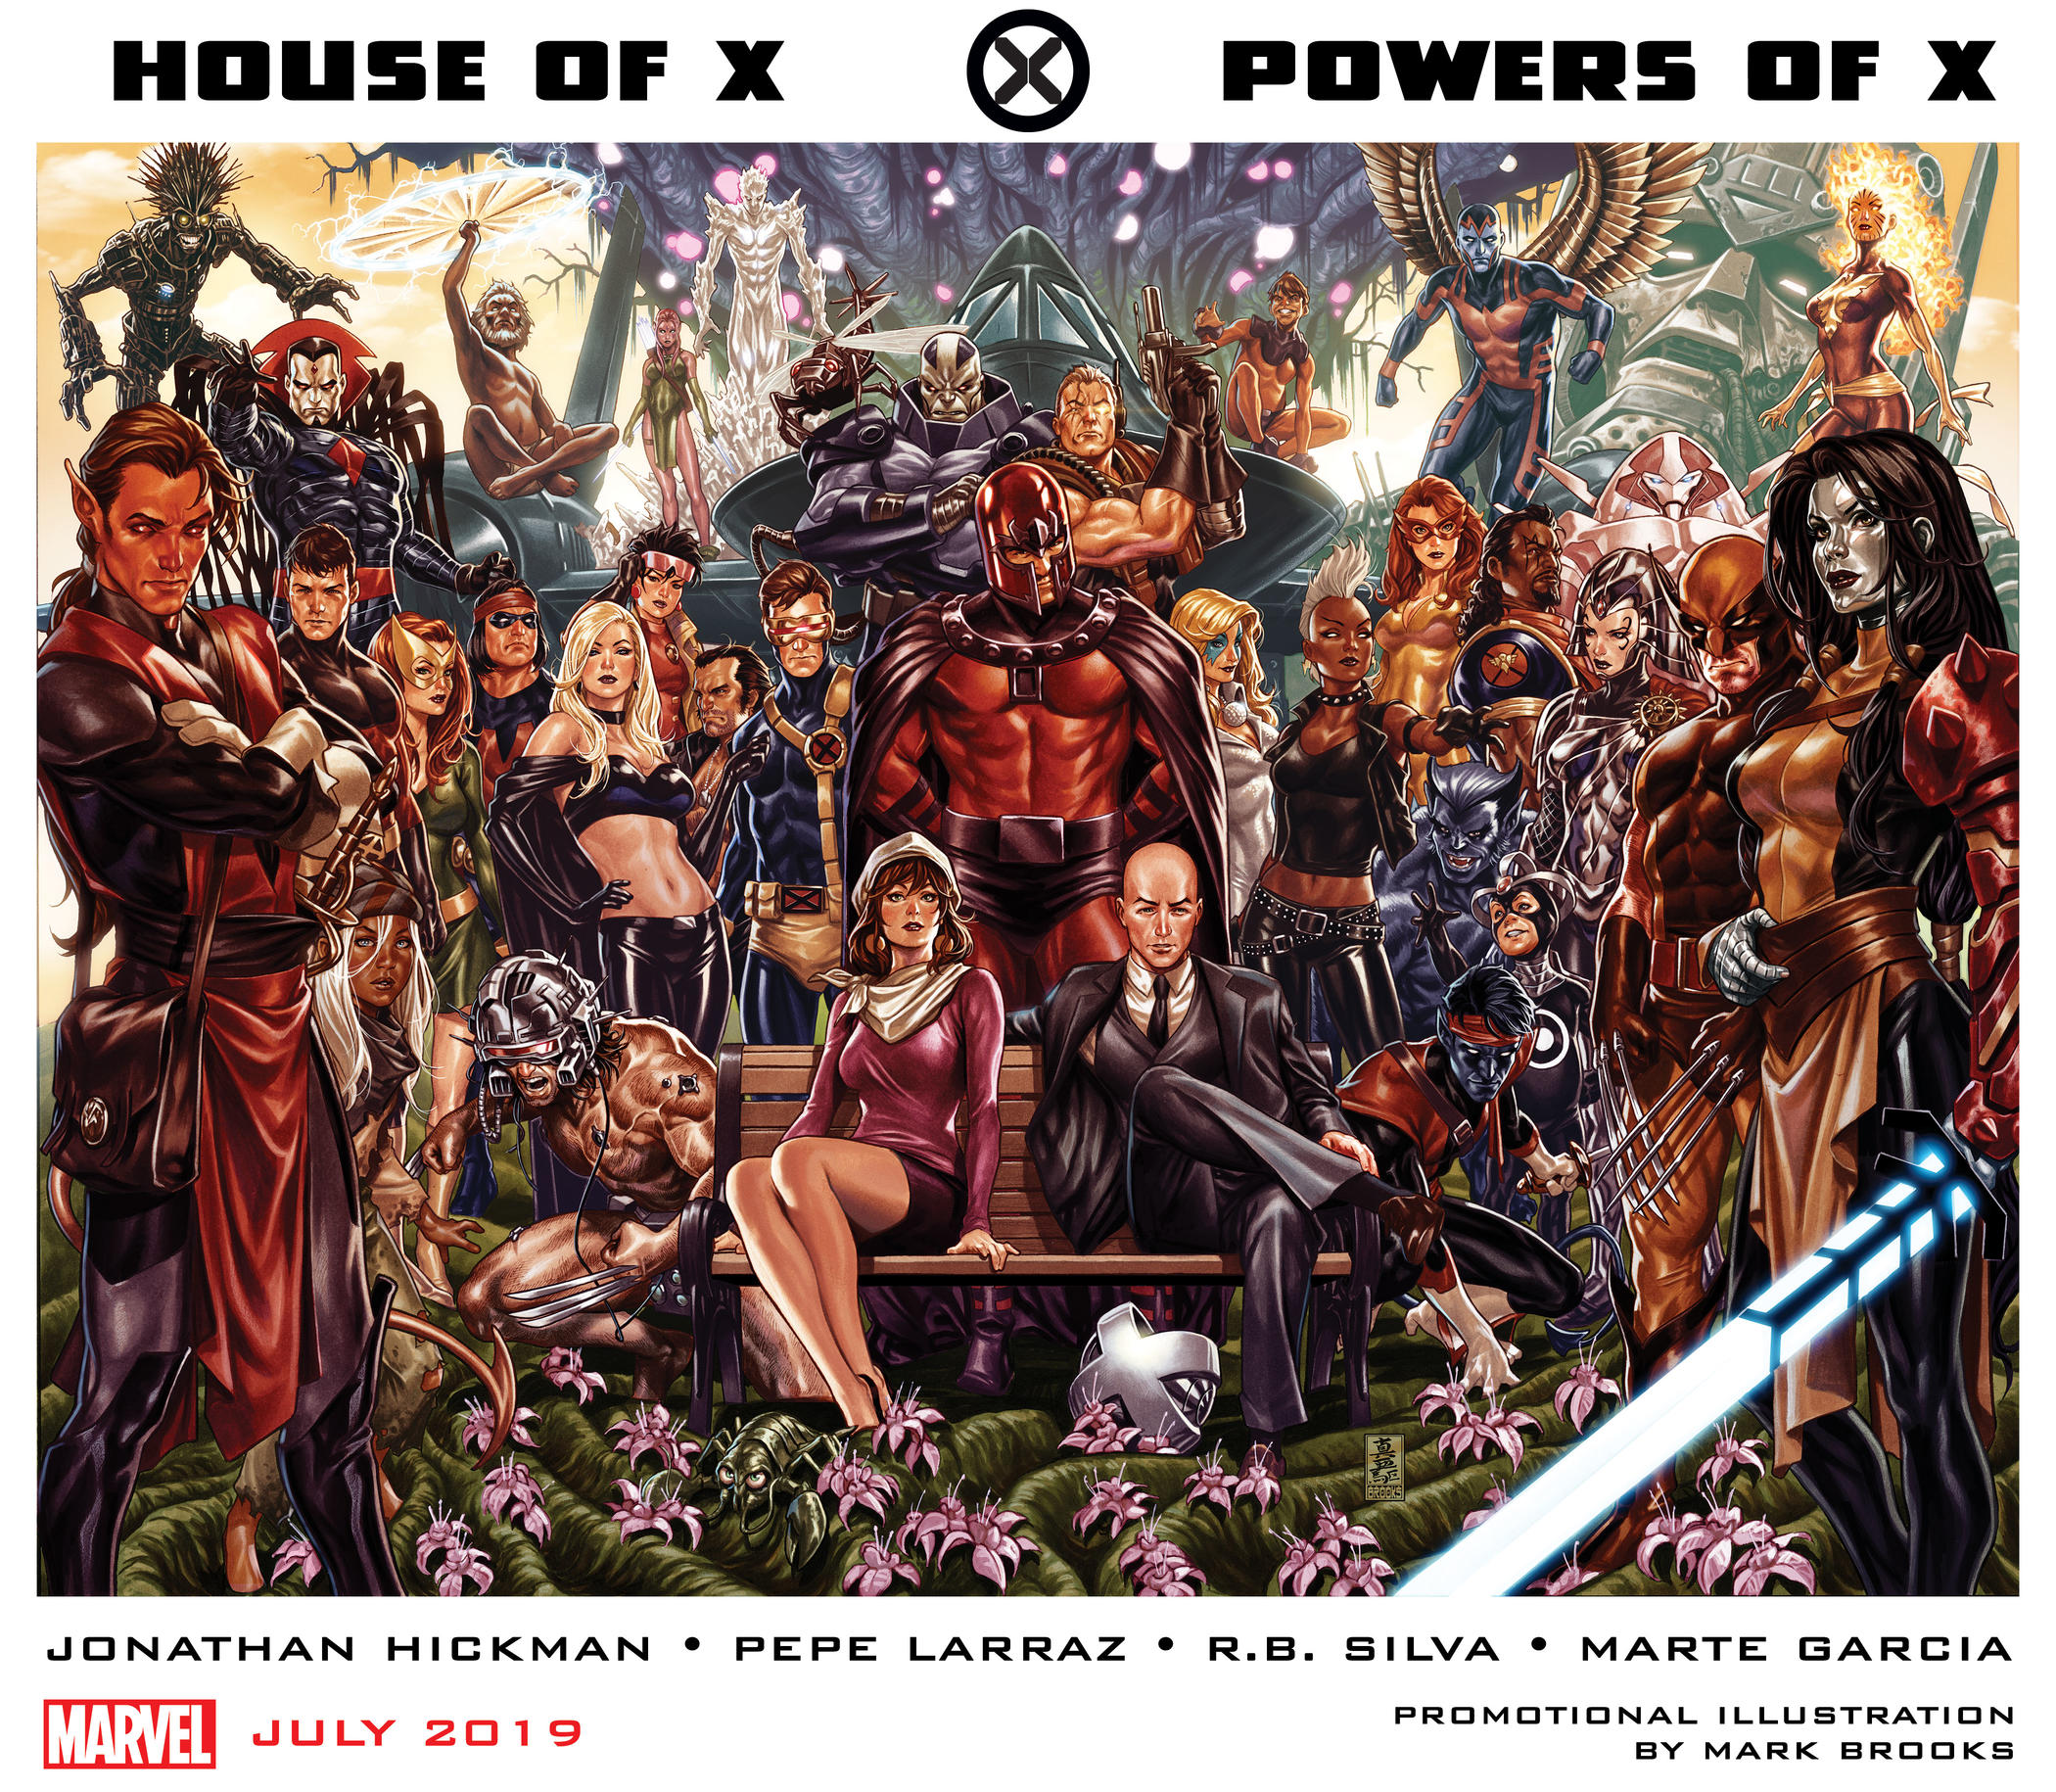 Jonathan Hickman to launch 2 new X-Men series: 'House of X' and 'Powers of X' this July